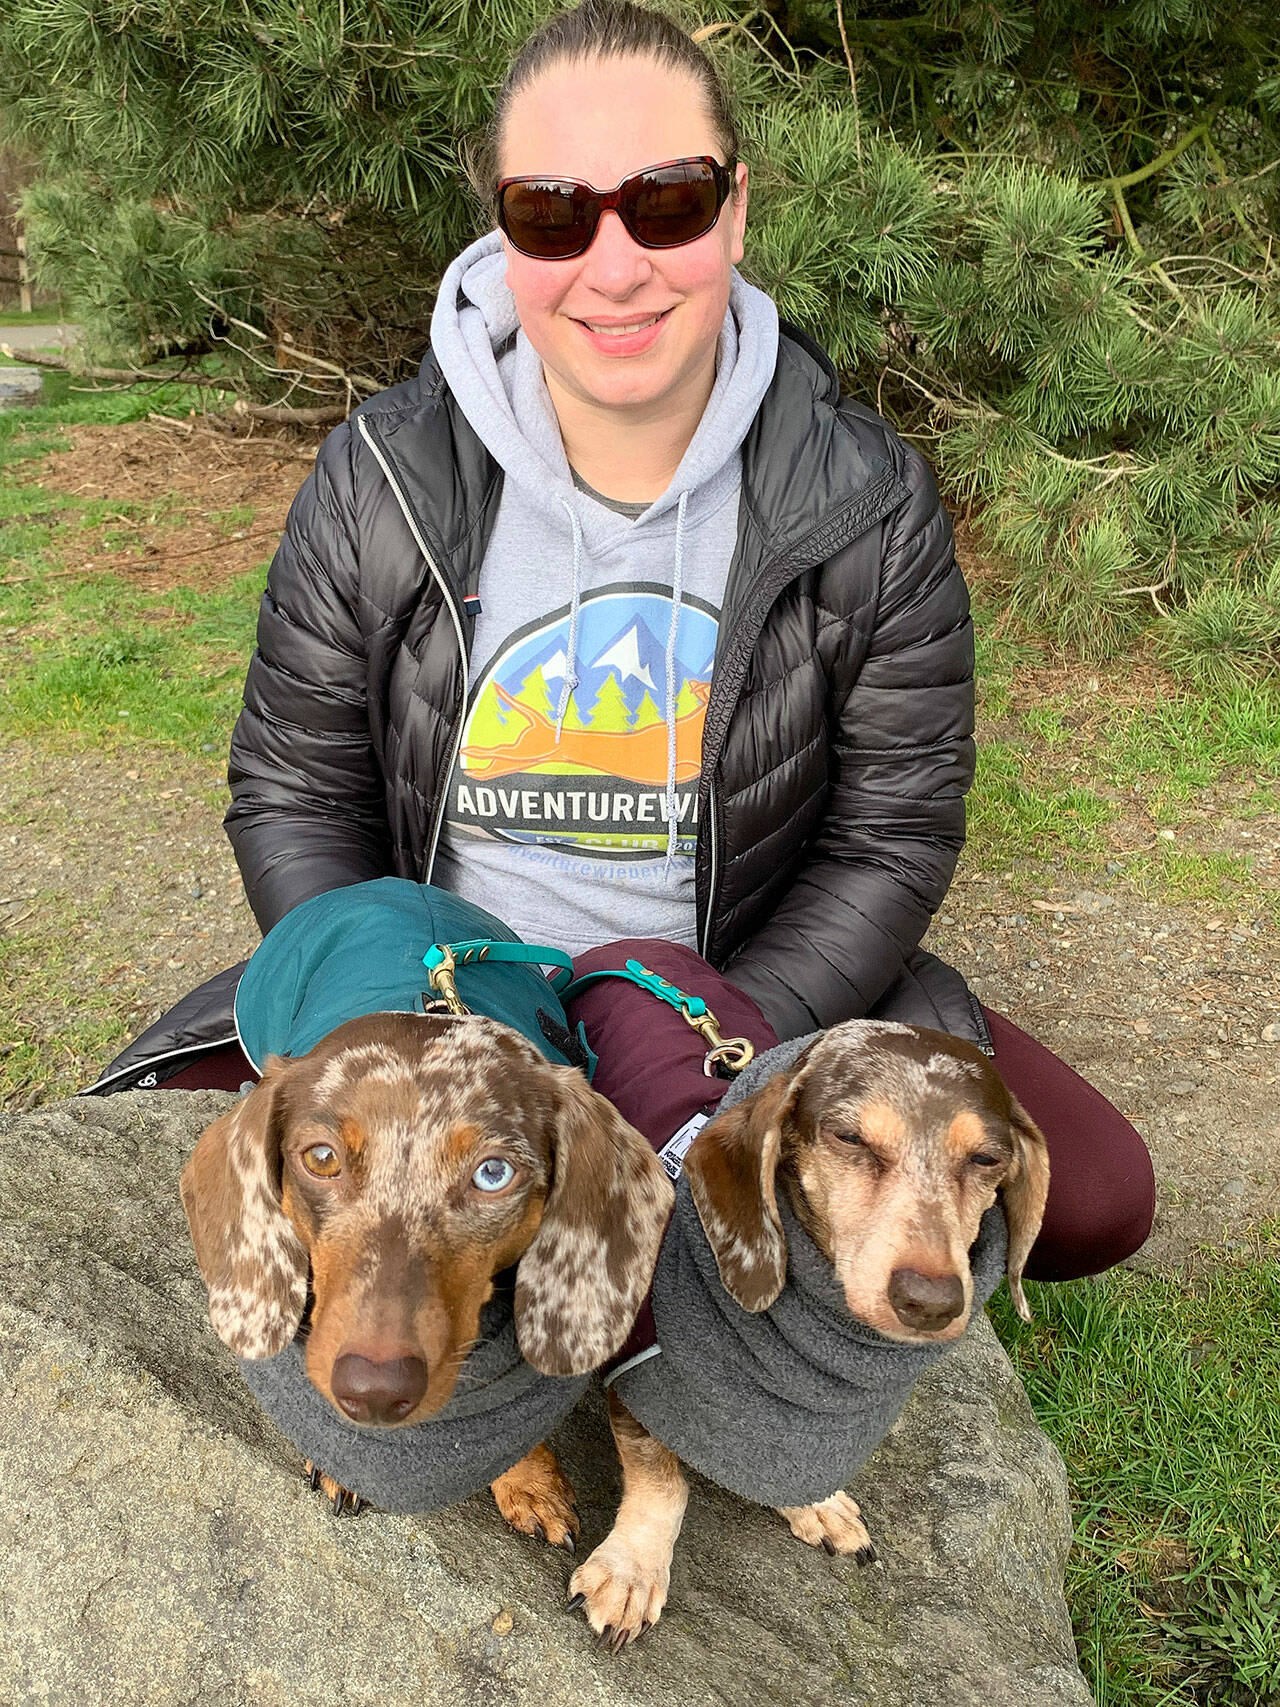 Gretel (left) and Summit take a break with their owner Jessica Williams, the organizer of the dachshund lovers group Adventurewiener Club. (Bob Smith | Kitsap Daily News)